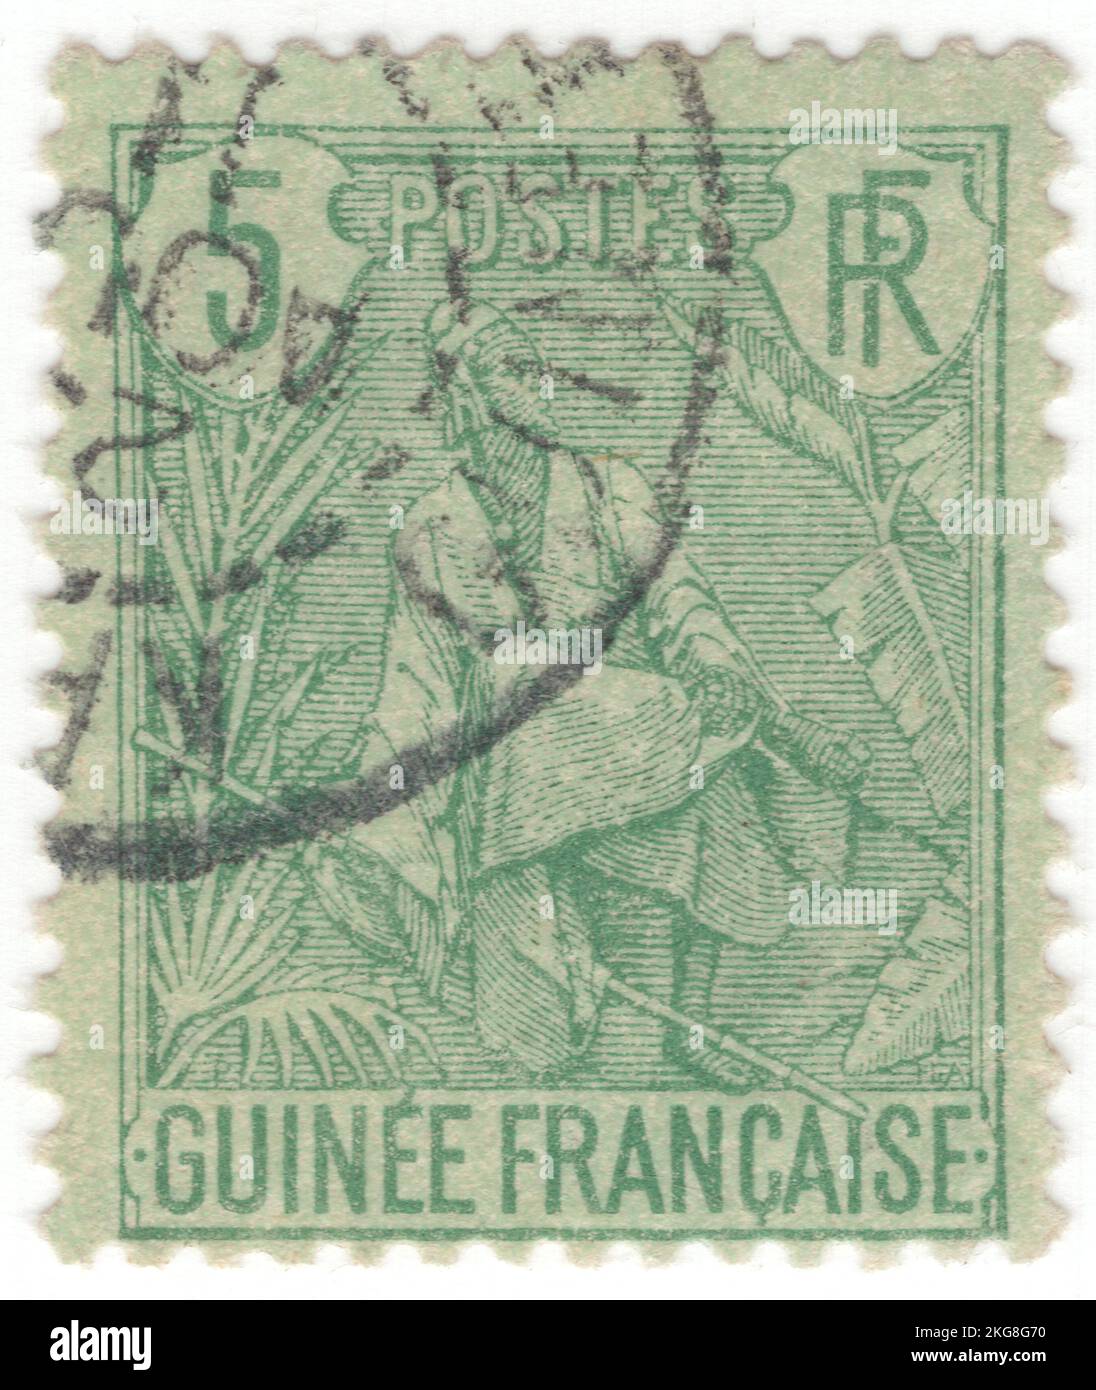 FRENCH GUINEA - 1904: An 5 centimes green on greenish postage stamp depicting Fulah Shepherd. The Fula, Fulani, or Fulah people are one of the largest ethnic groups in the Sahel and West Africa, widely dispersed across the region. Inhabiting many countries, they live mainly in West Africa and northern parts of Central Africa, South Sudan, Darfur, and regions near the Red Sea coast in Sudan. The approximate number of Fula people is unknown due to clashing definitions regarding Fula ethnicity. Various estimates put the figure between 25 and 40 million people worldwide Stock Photo